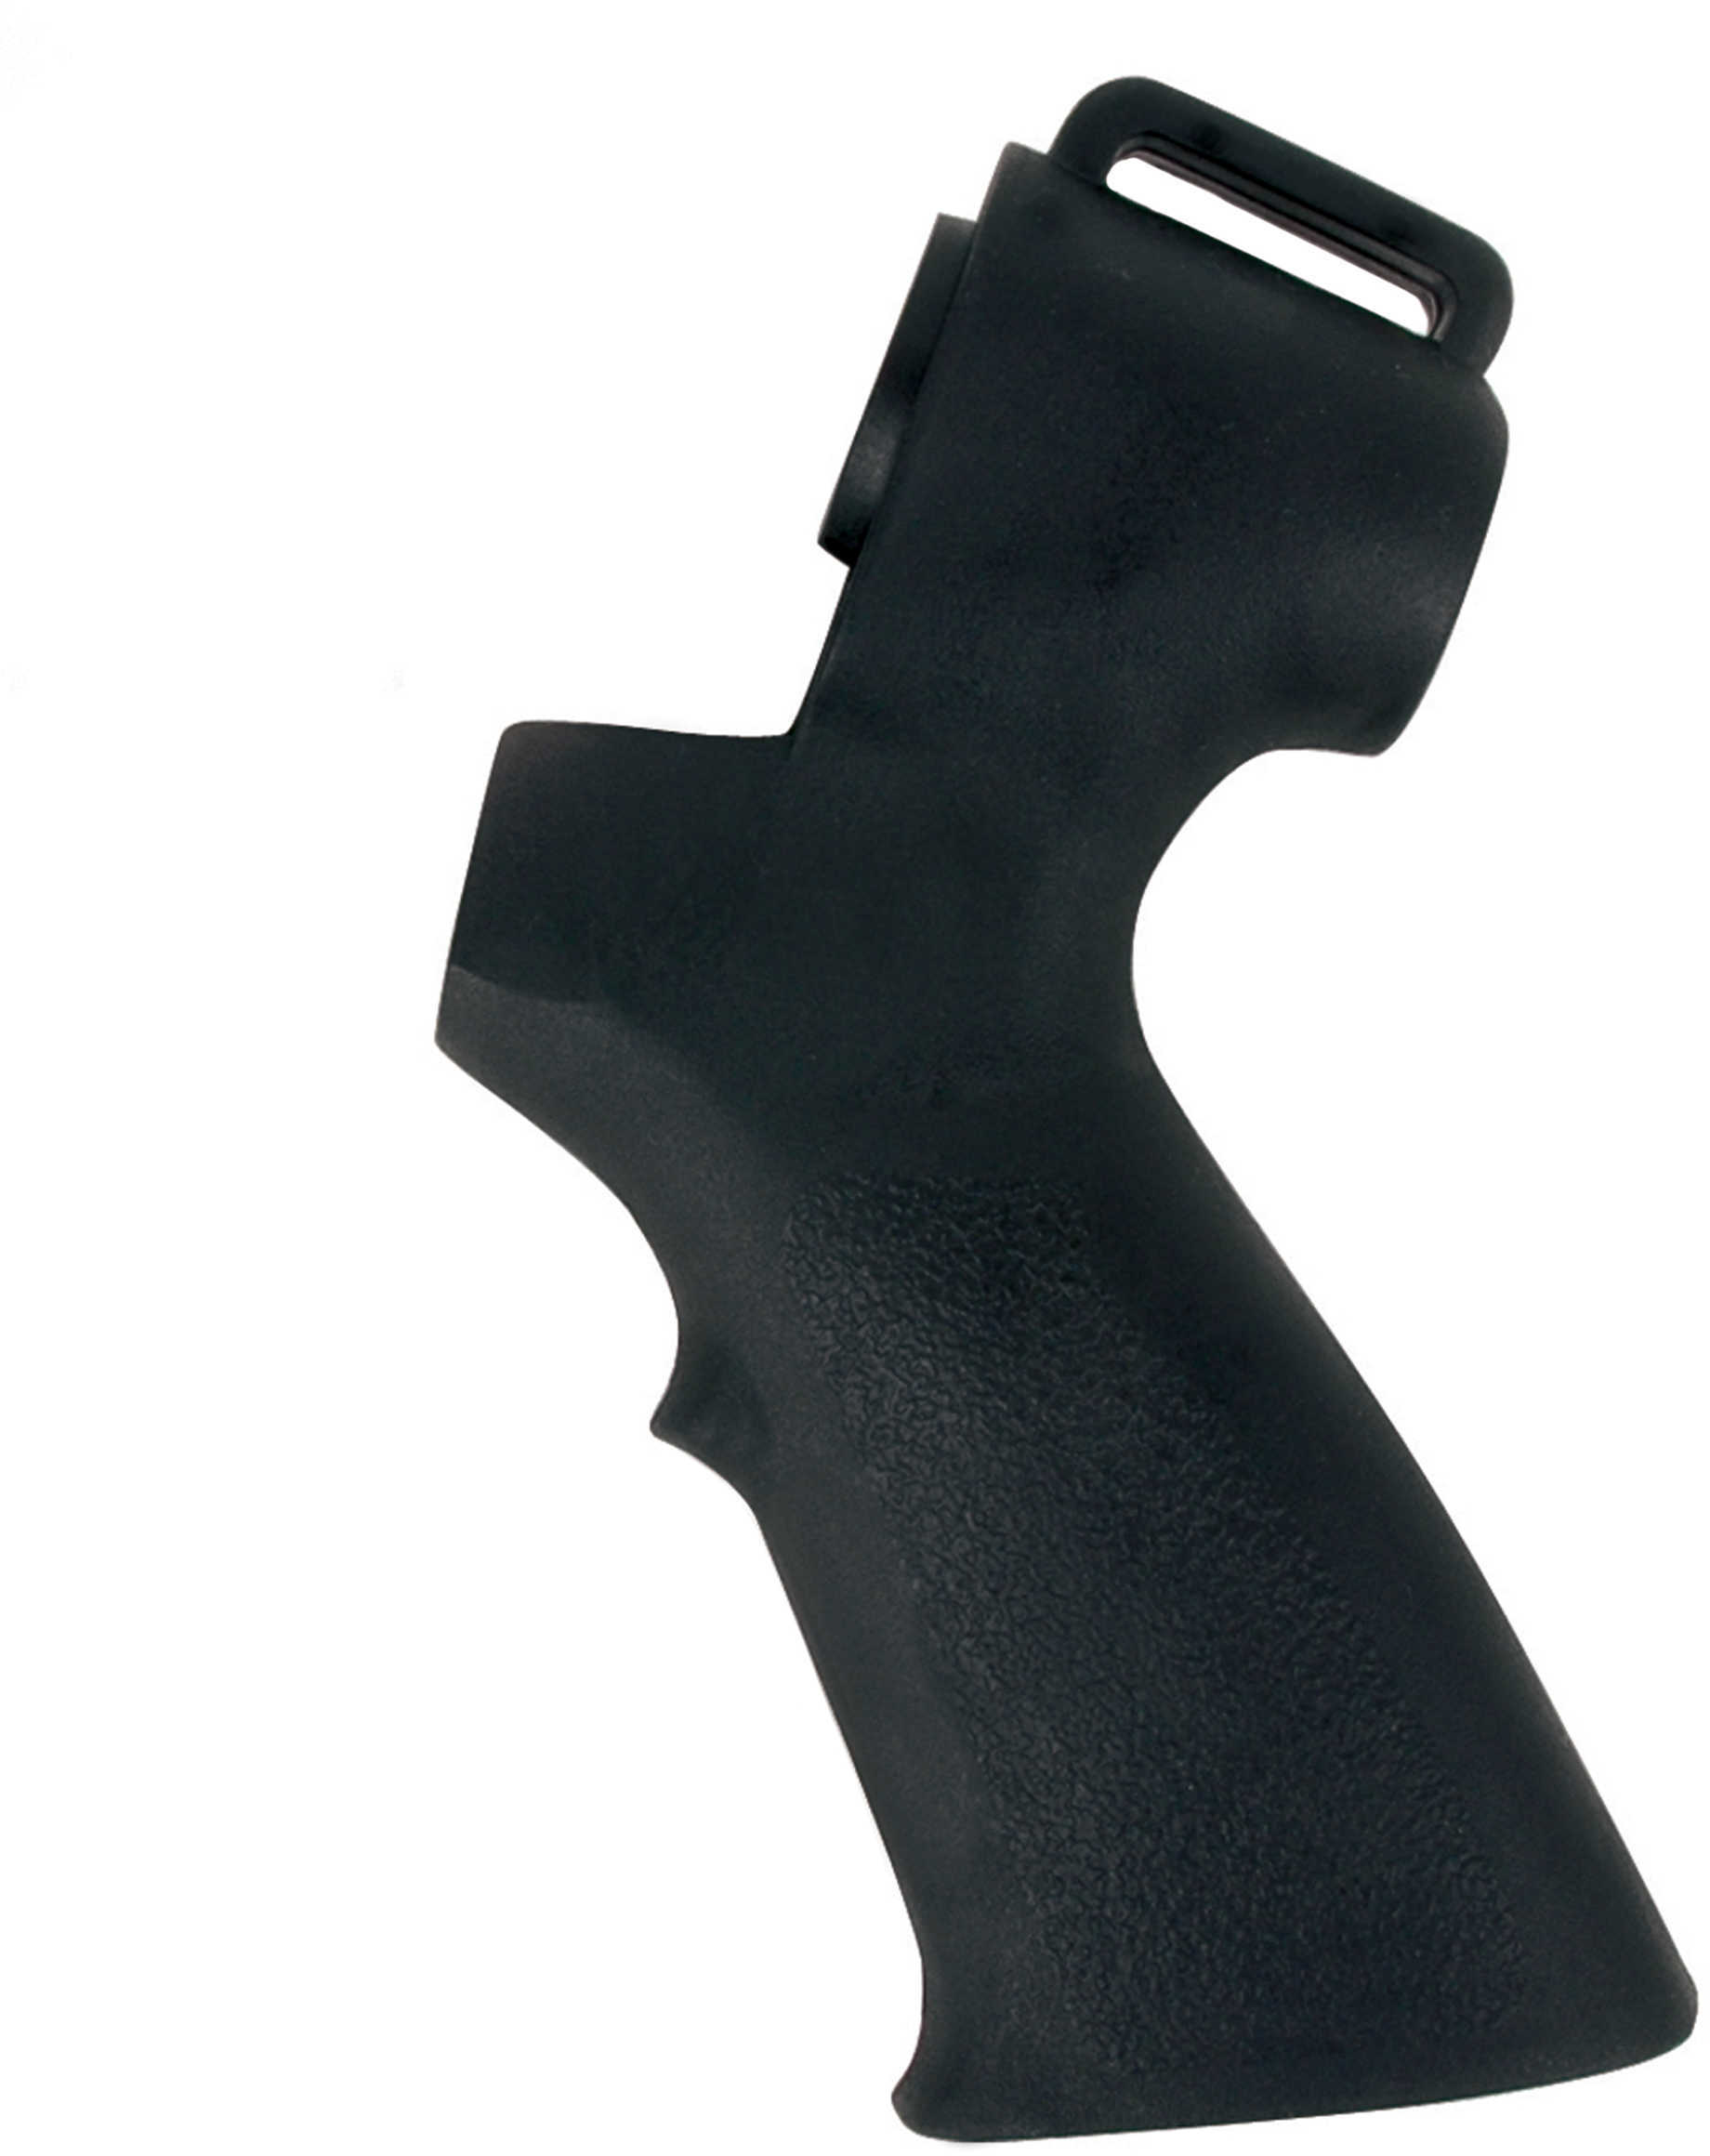 Adv. Tech. Pistol Grip Kit For Most PUMPS Black Sy-img-1